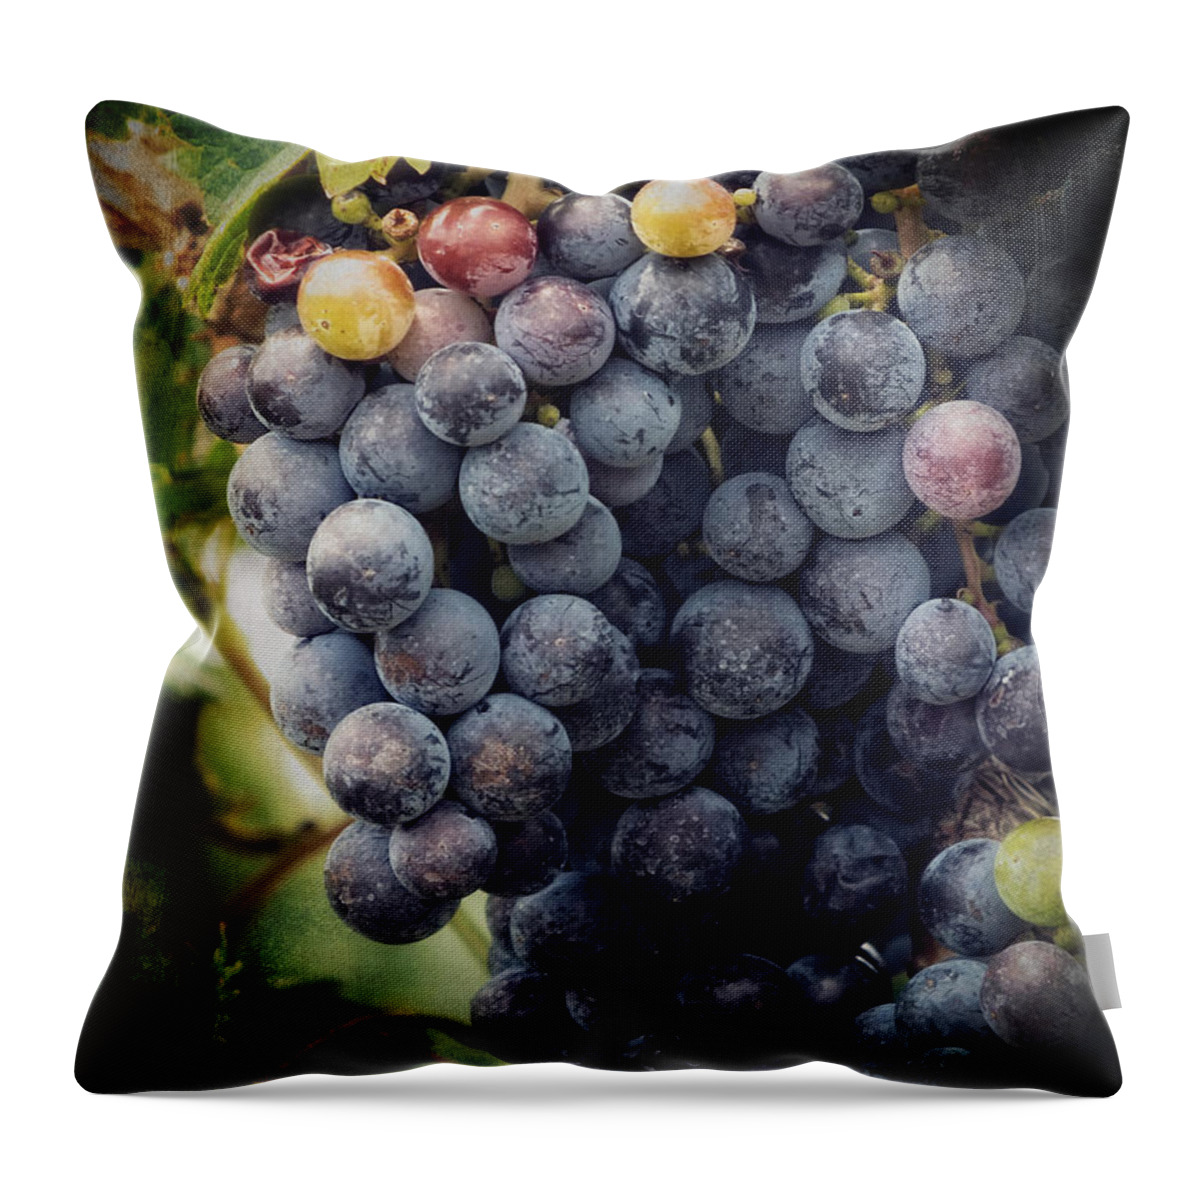 Merlot Throw Pillow featuring the photograph Ready for Harvest by Lucinda Walter